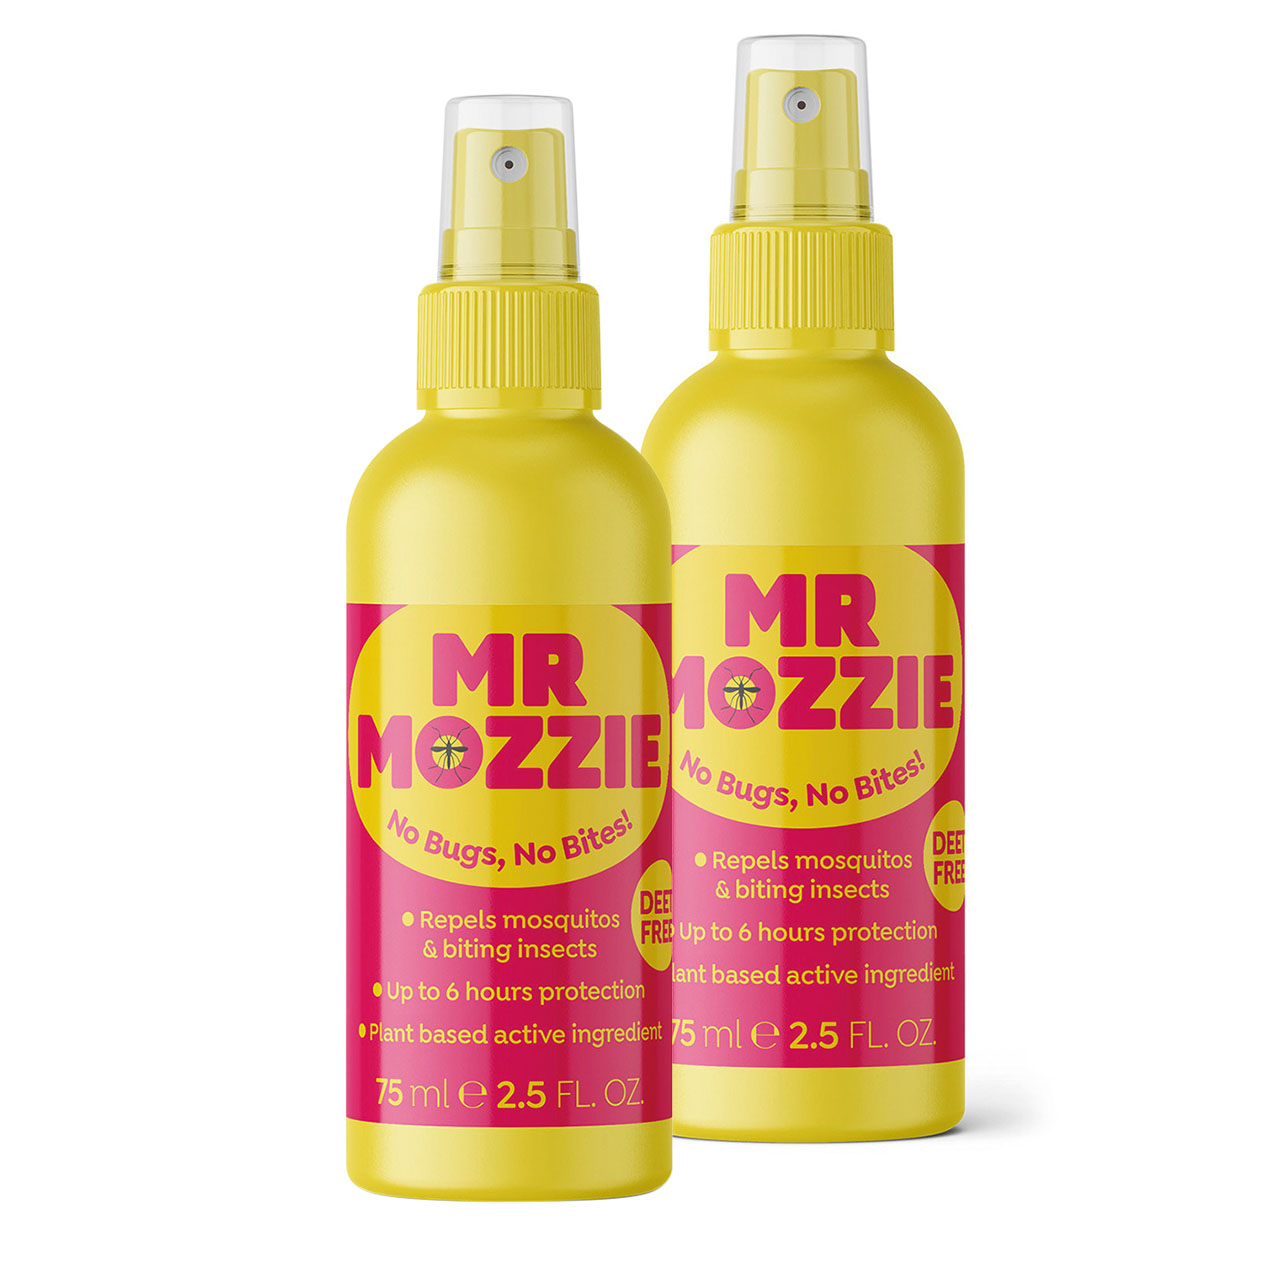 Mozzie Off Insect Repellent - Pack of 2